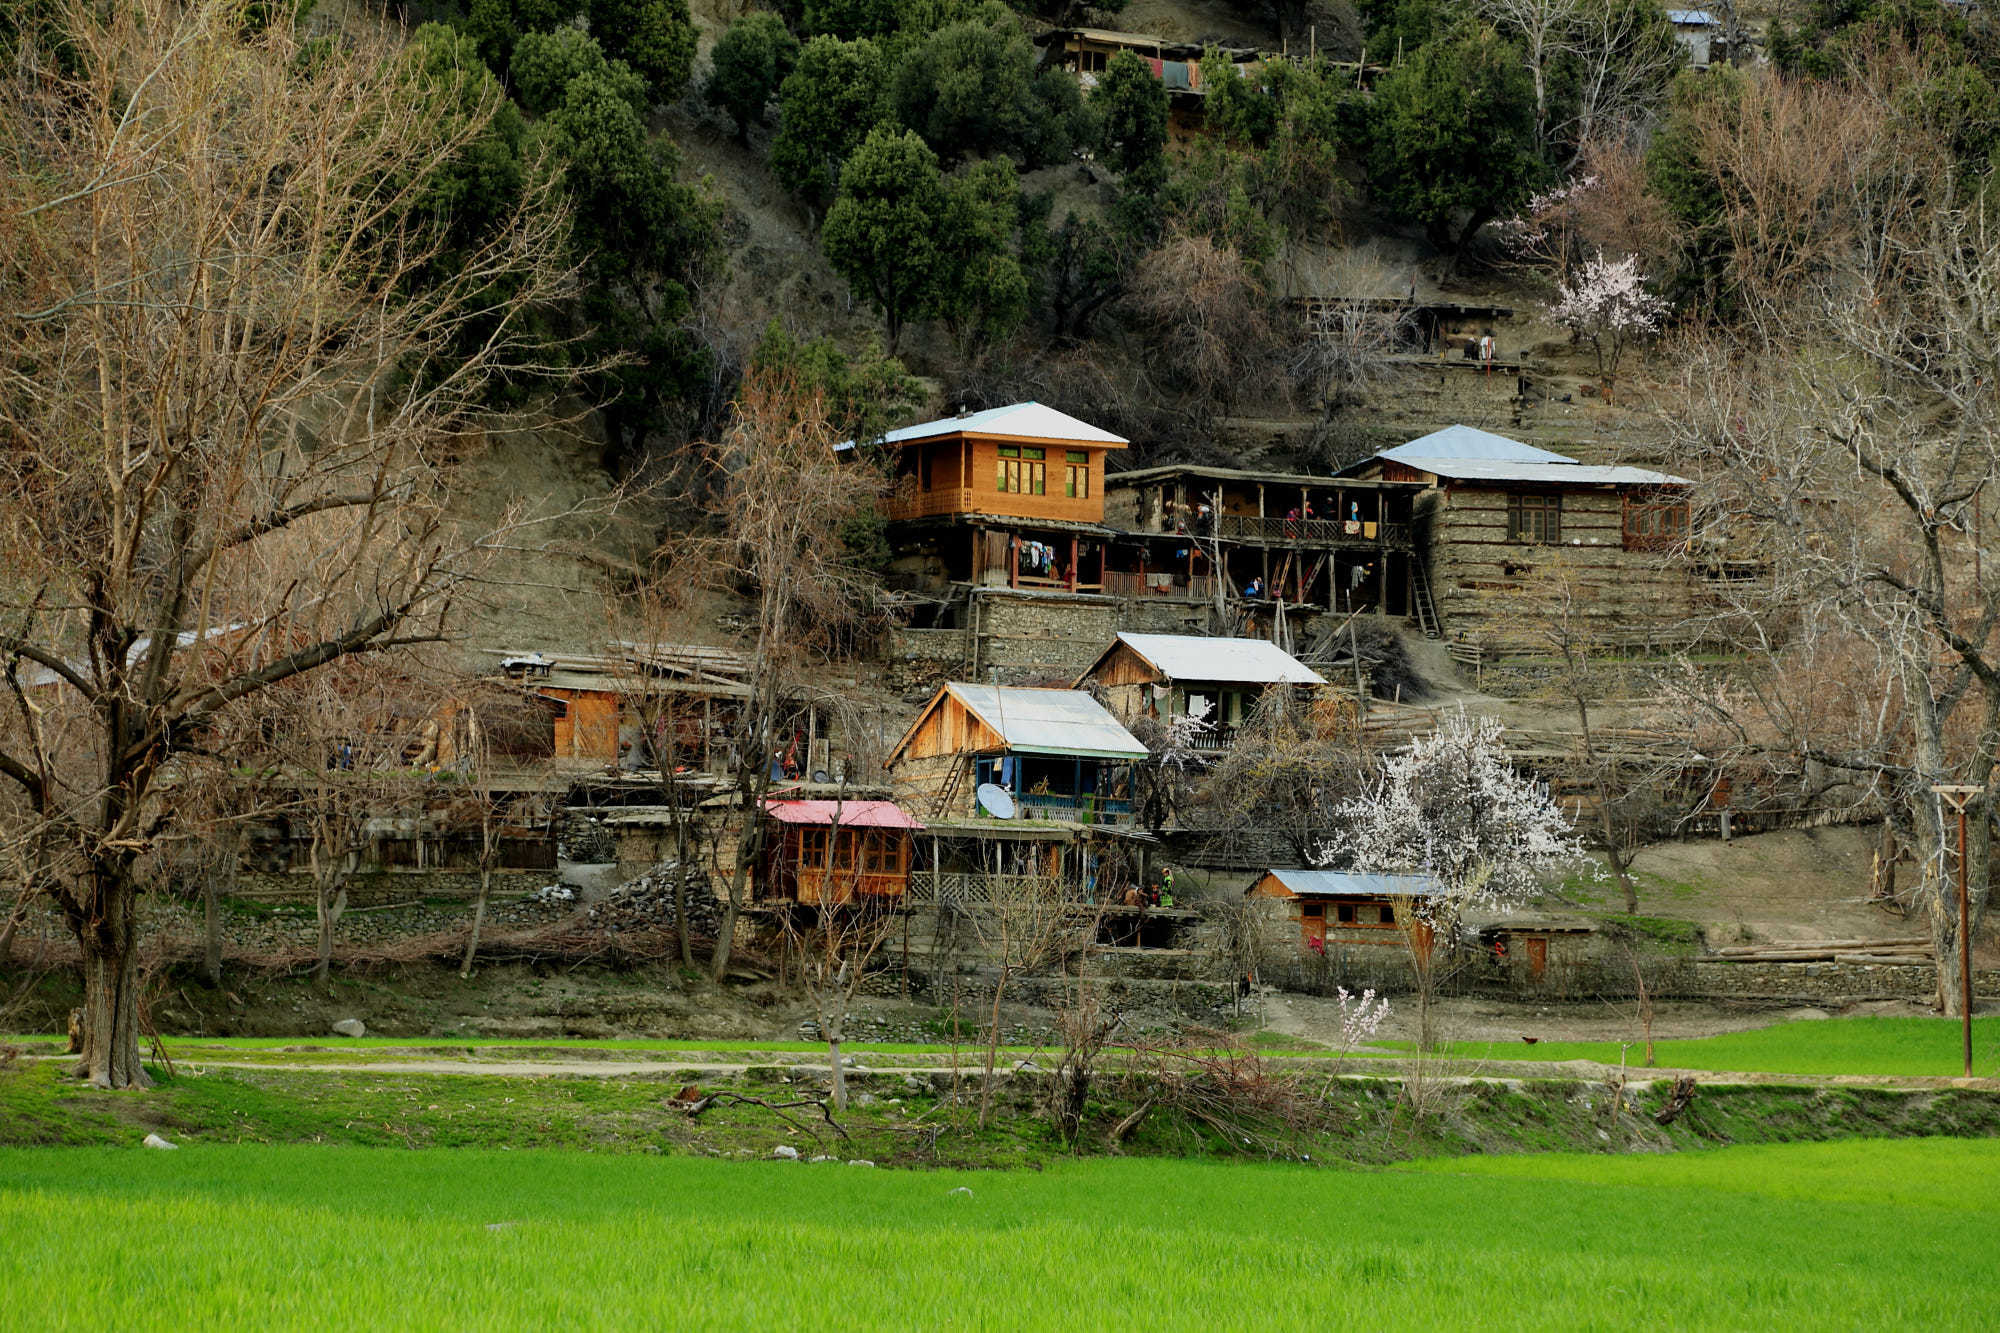 Kalash Valley Travel Guide | Things to Do - PakTrips